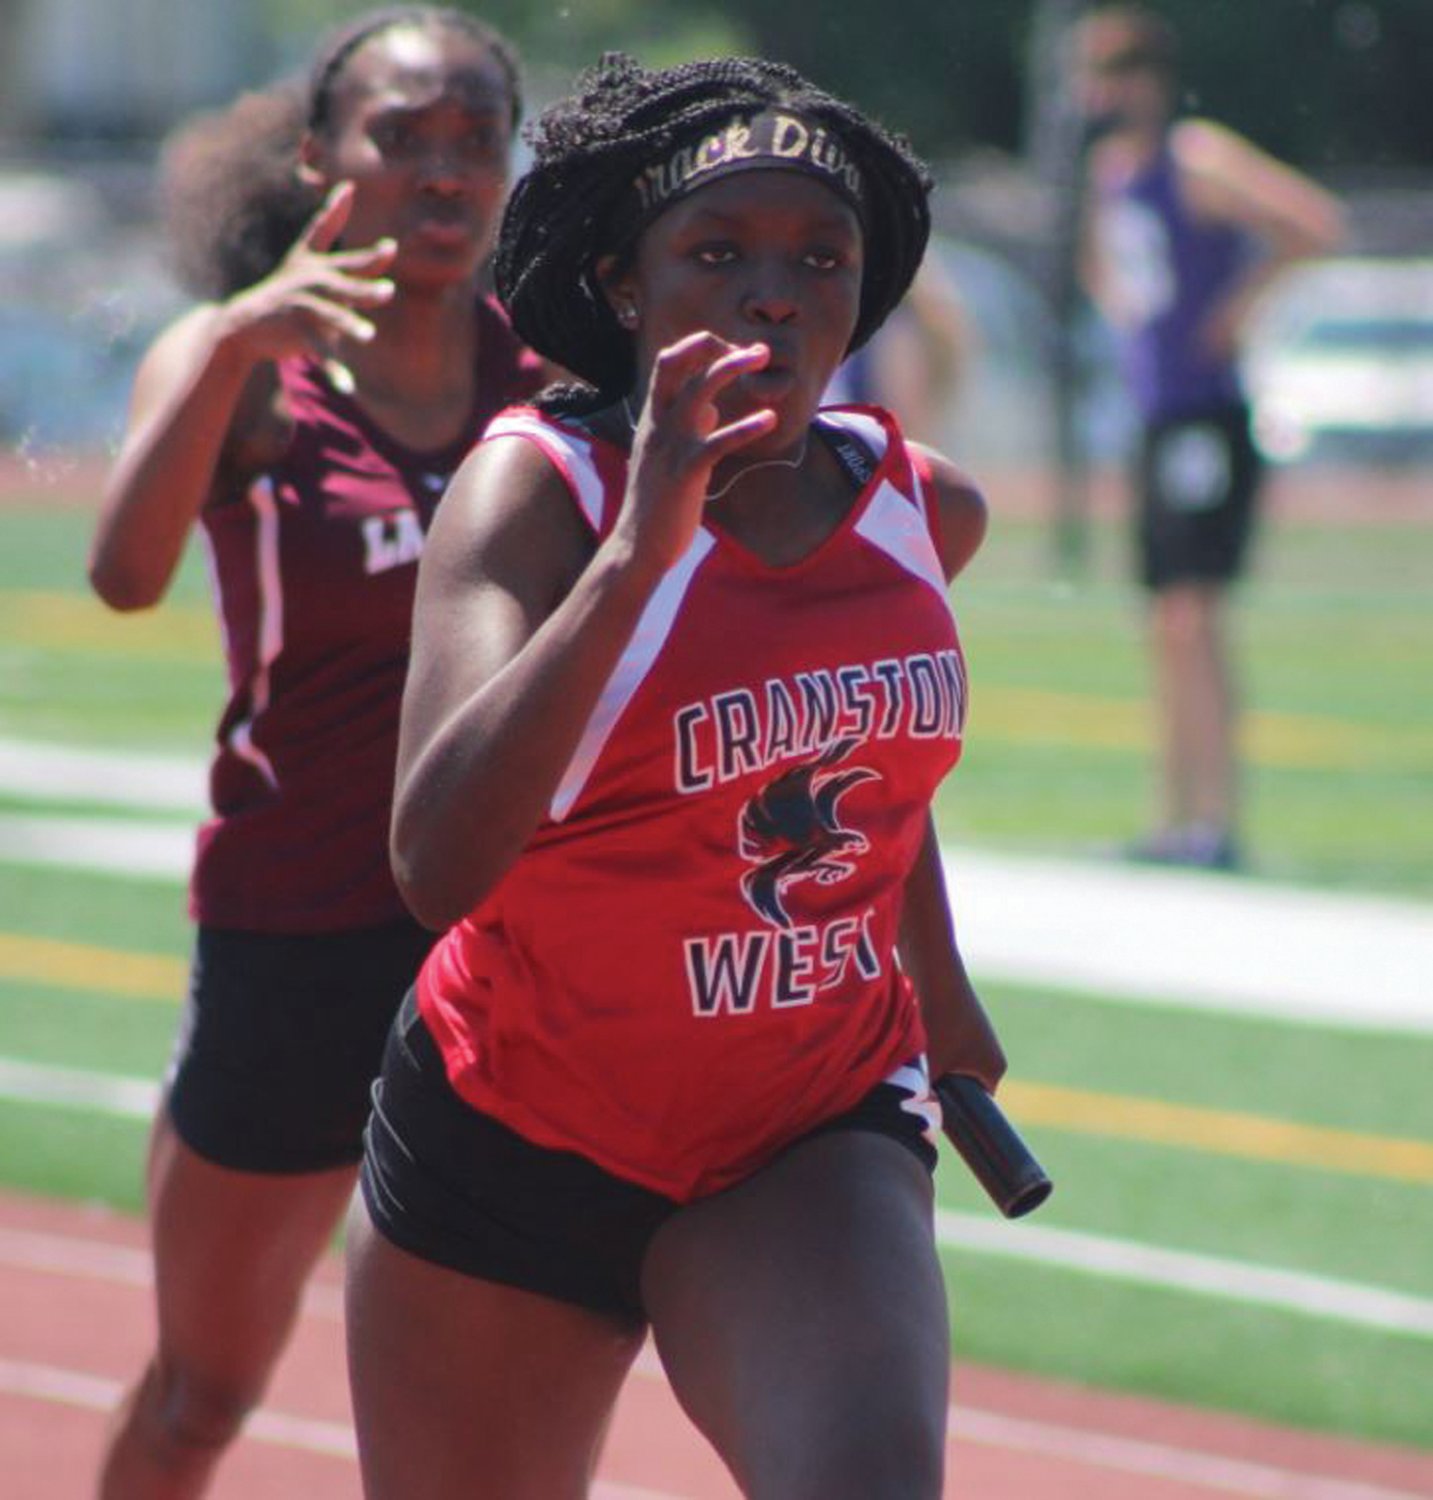 RELAY RACE: Cranston West sprinter Ailani Sutherland
competes in a relay race in the Division Championships
last weekend at Conley Stadium in Providence. Sutherland was part of the team that won the 400 which was key in the Lady Falcons claiming third place overall as a team.